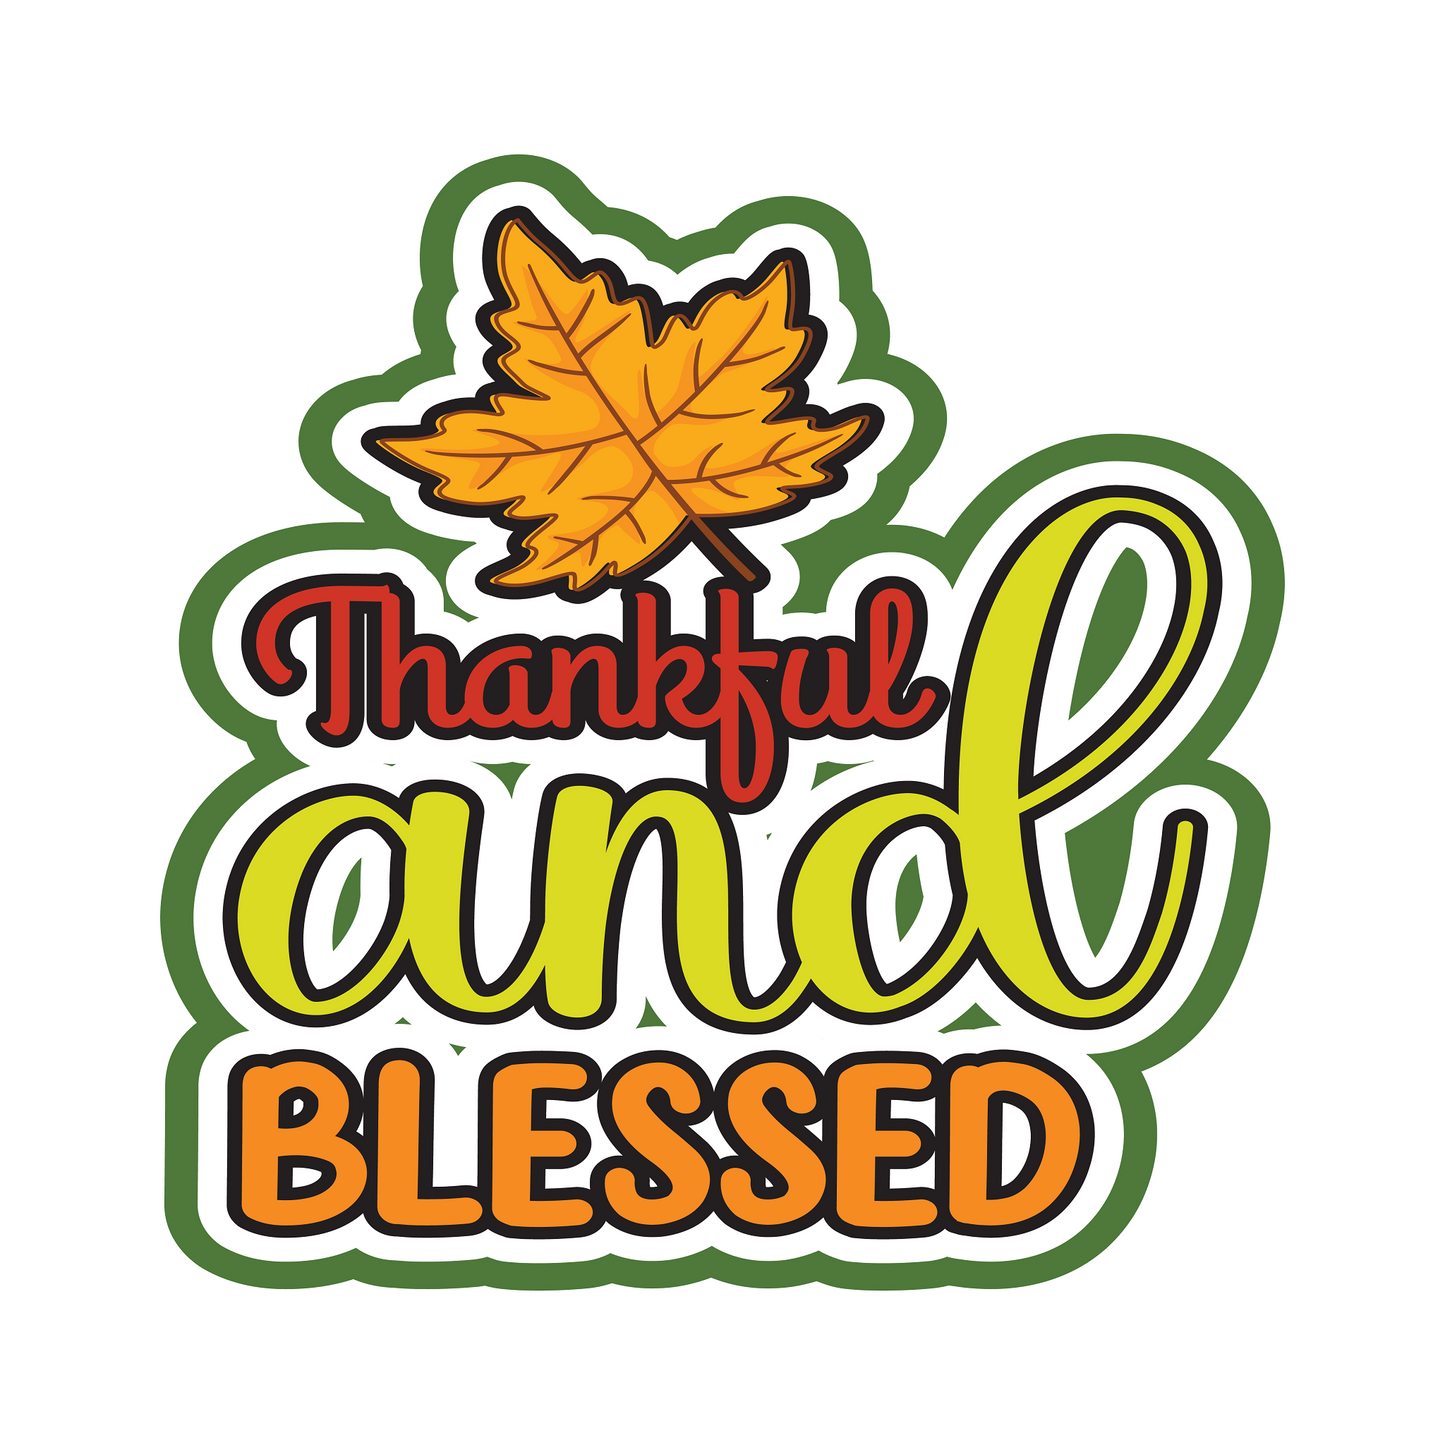 Inspirational Quote Thankful And Blessed Motivational Sticker Vinyl Decal Motivation Stickers- 5" Vinyl Sticker Waterproof